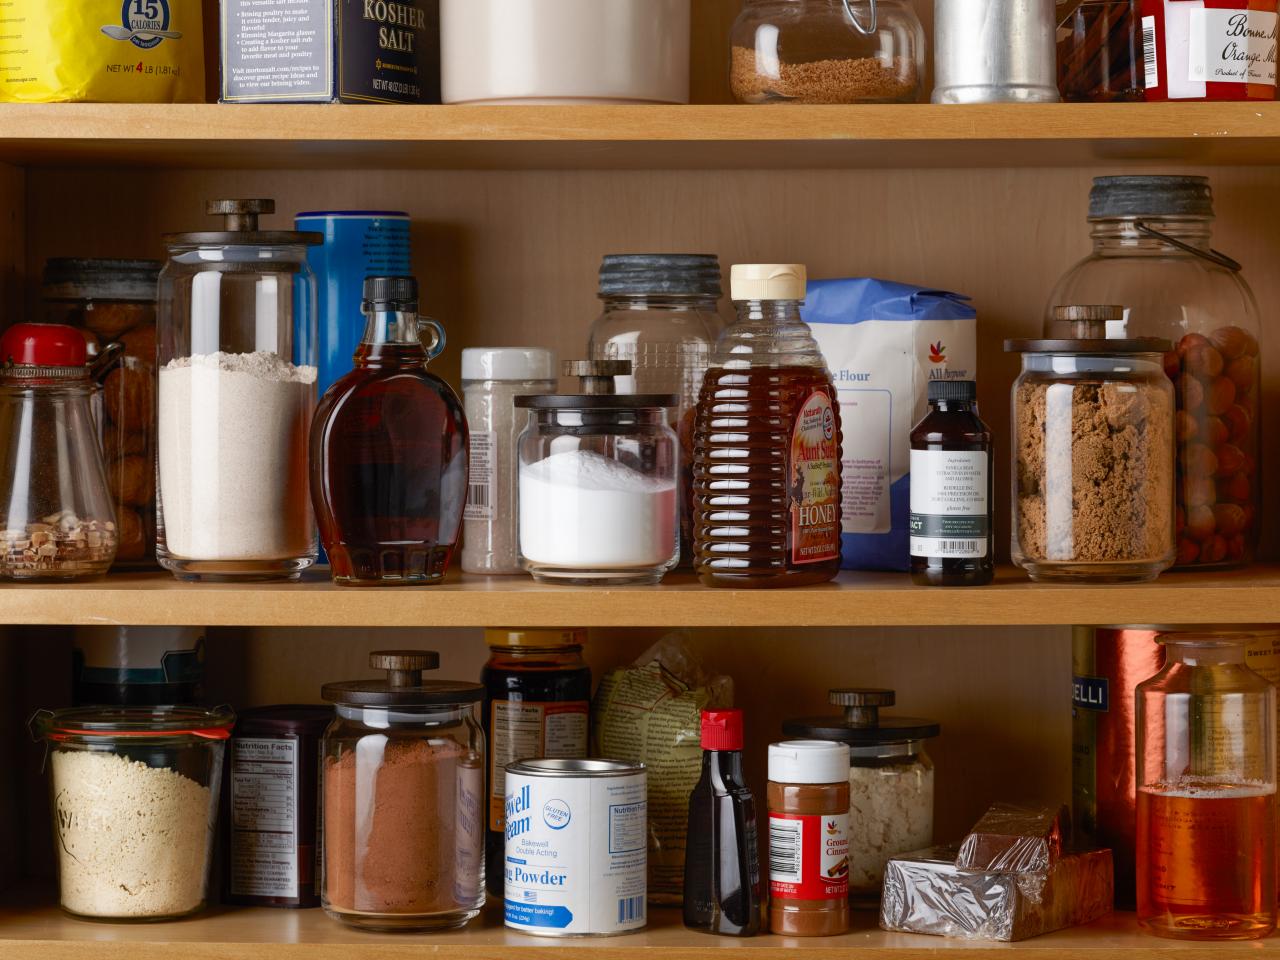 How to Store Flour, Sugar, and Other Baking Staples to Keep Them Fresh